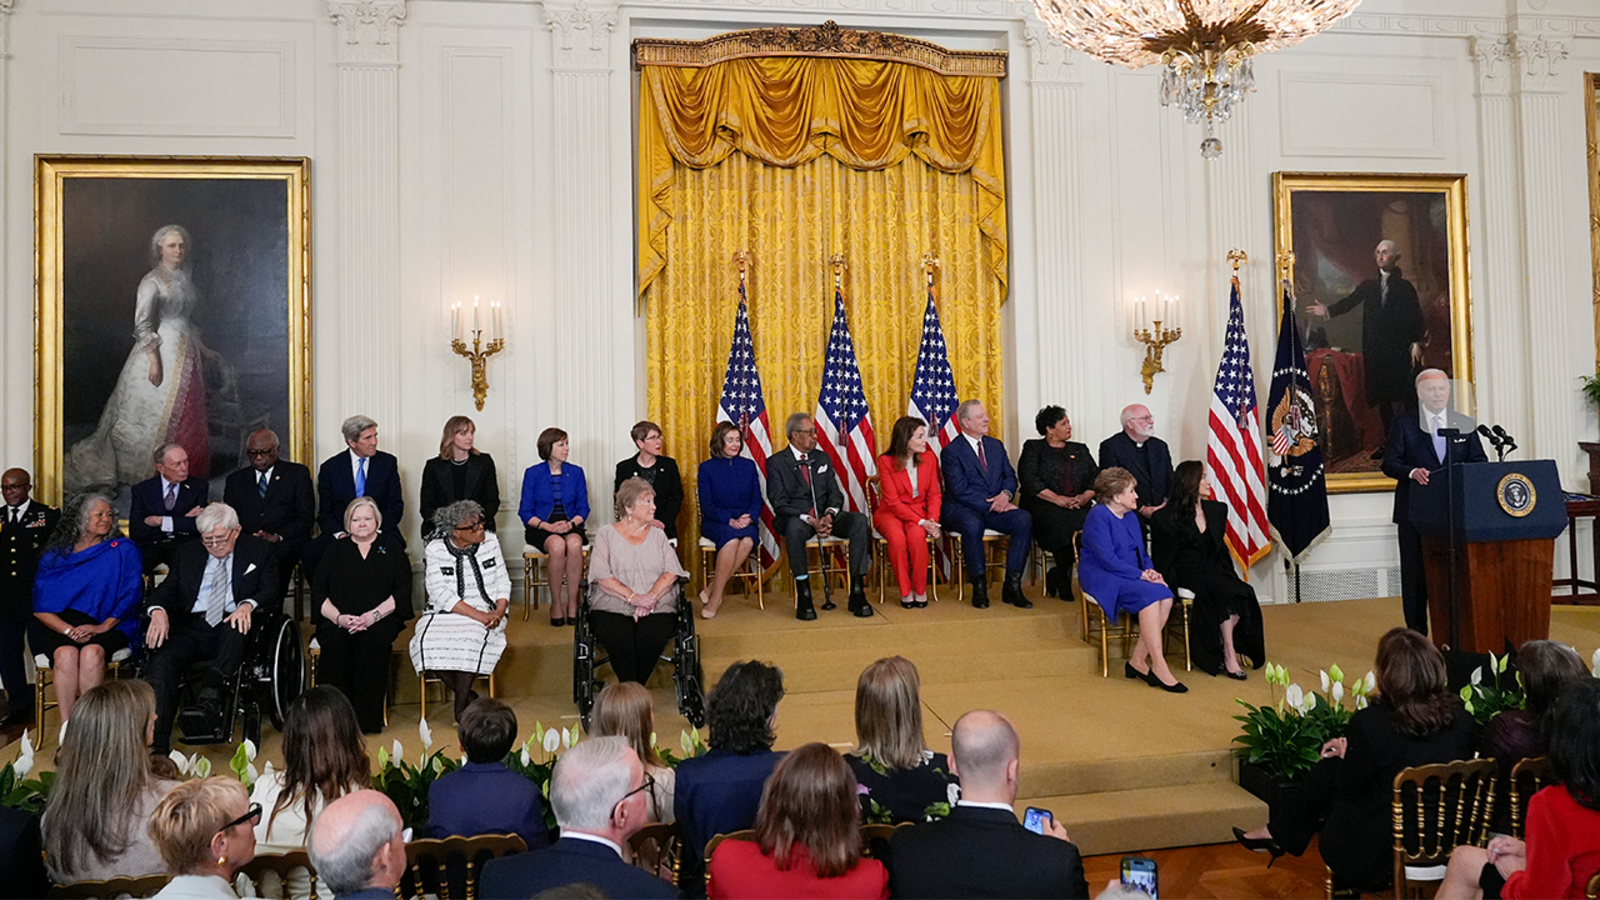 Biden awards Presidential Medal of Freedom to 19 politicians, activists, athletes and others